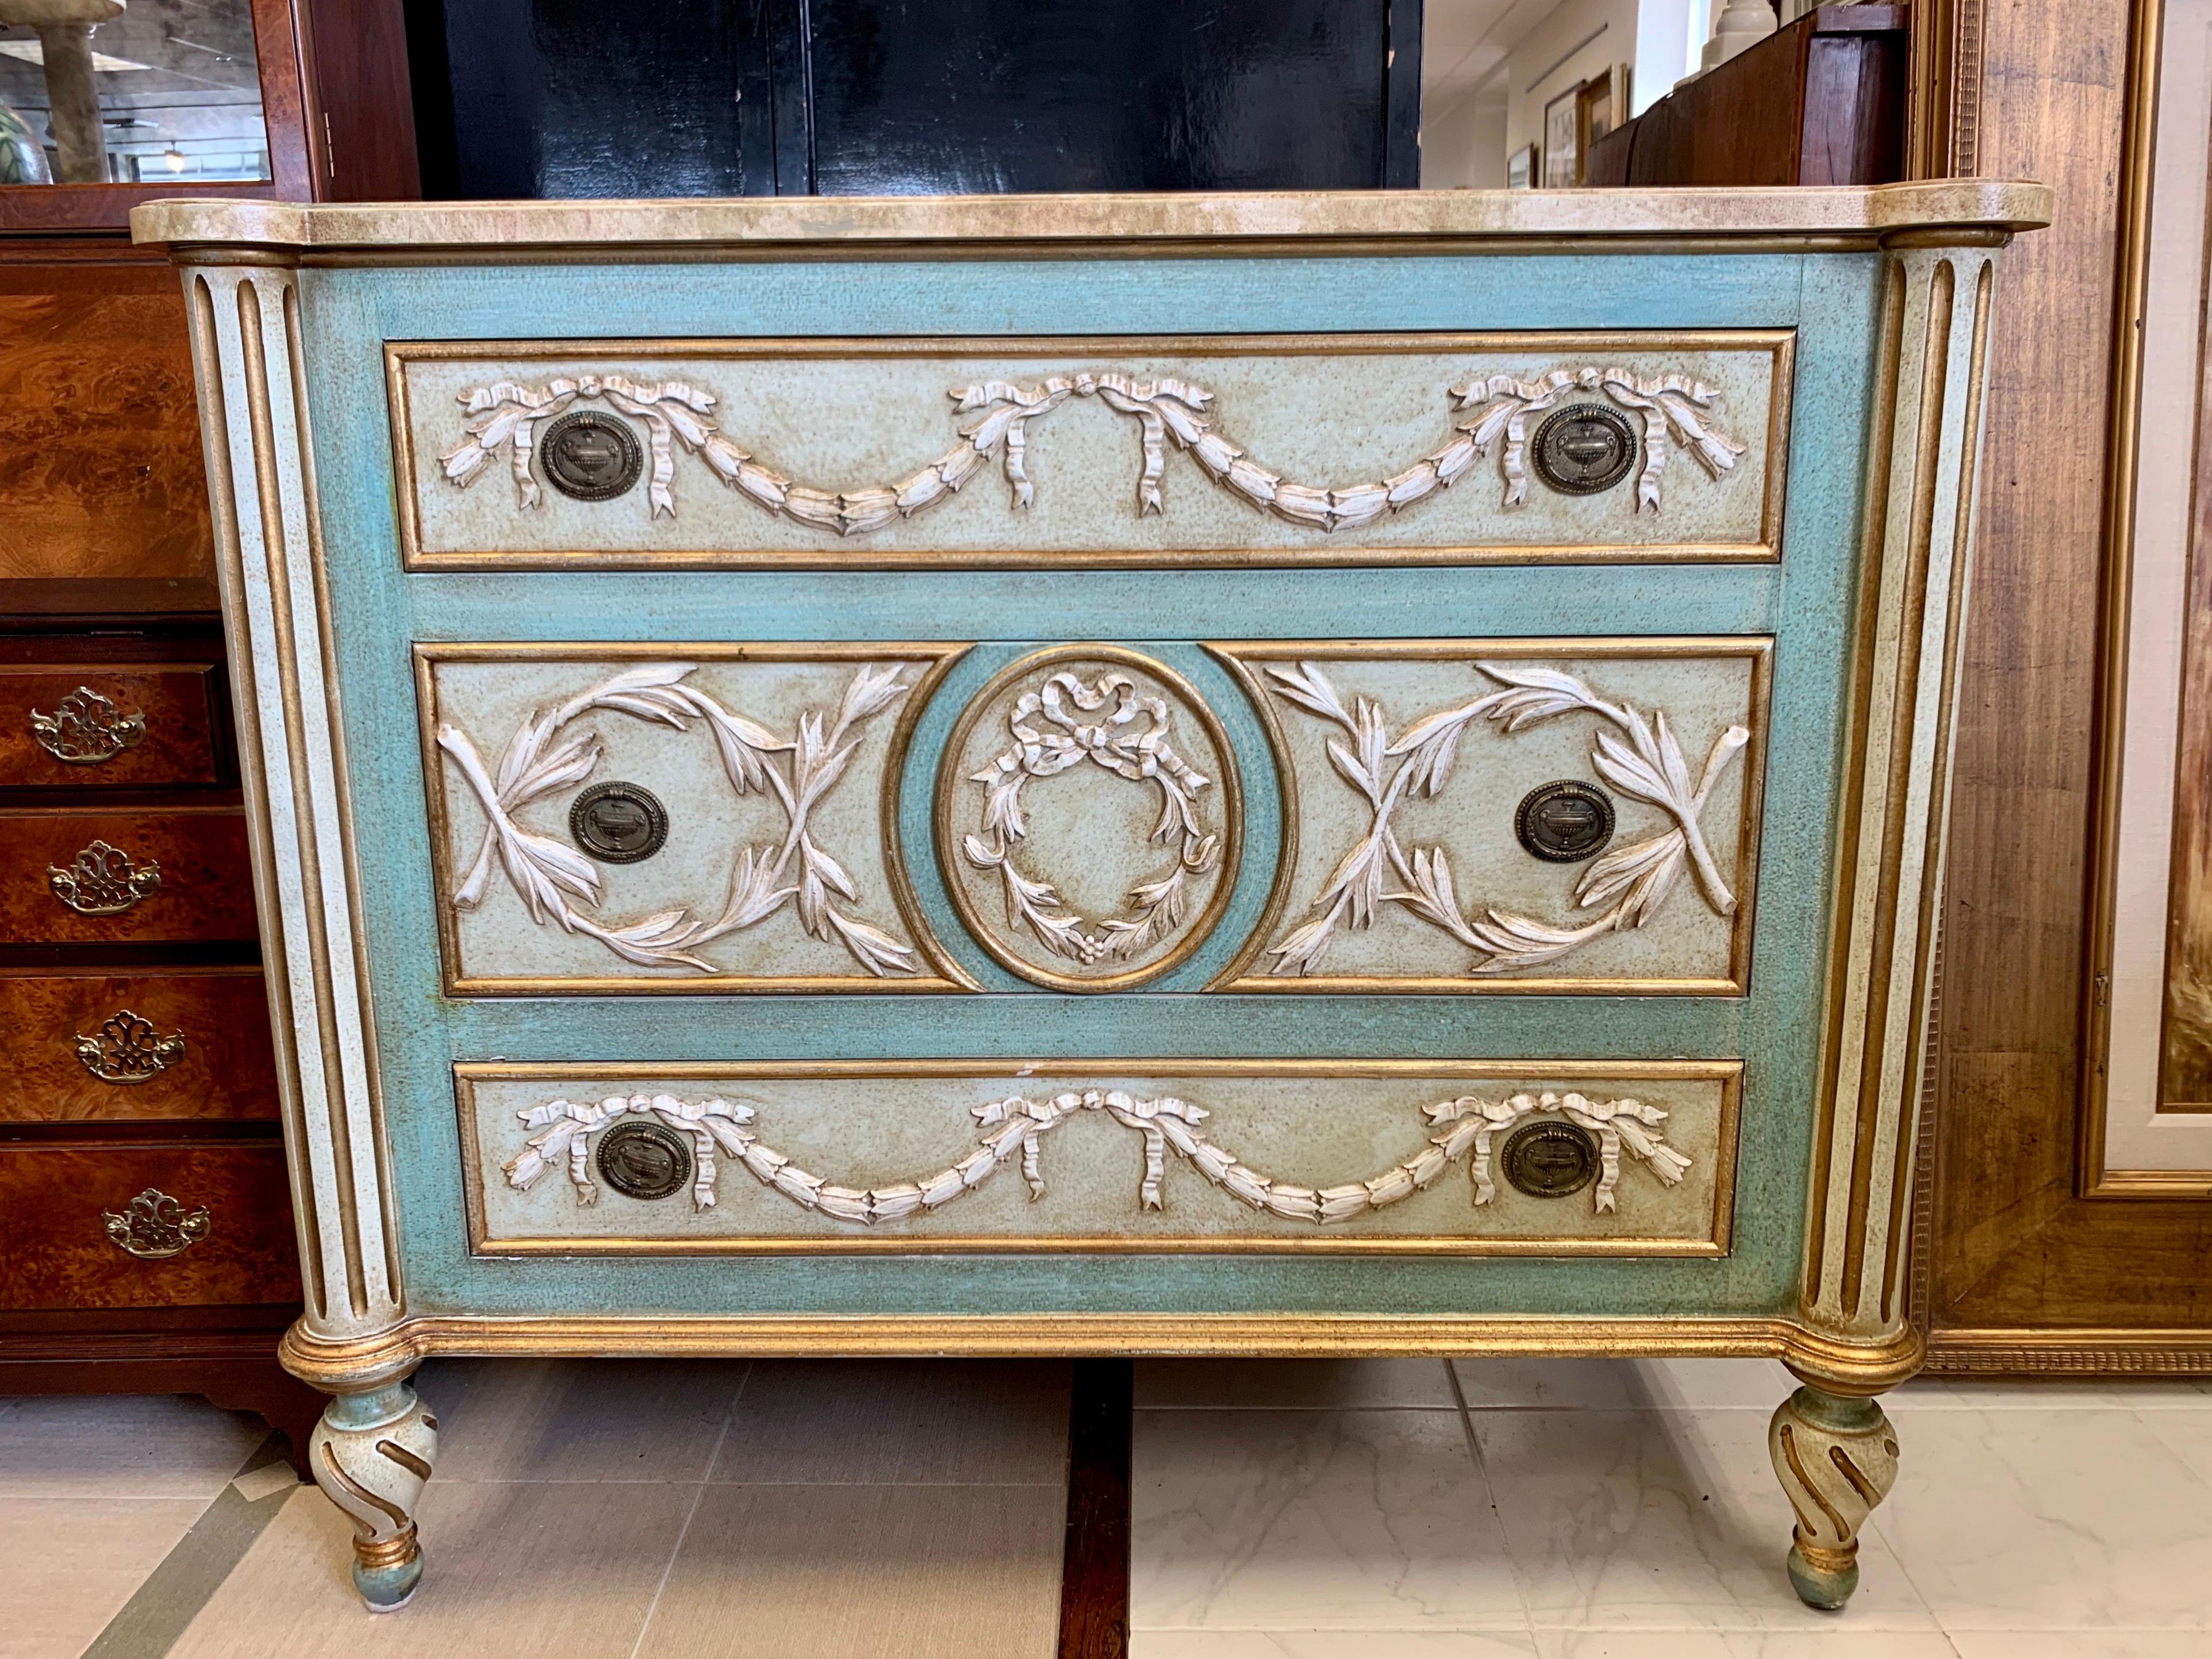 One-of-a-kind hand painted neoclassical dresser with faux marble painted top and raised acanthus leaves with ribbon detail on three sides. Three drawers of varying size and an incredible color scheme of seafoam green gold and cream. The chest is